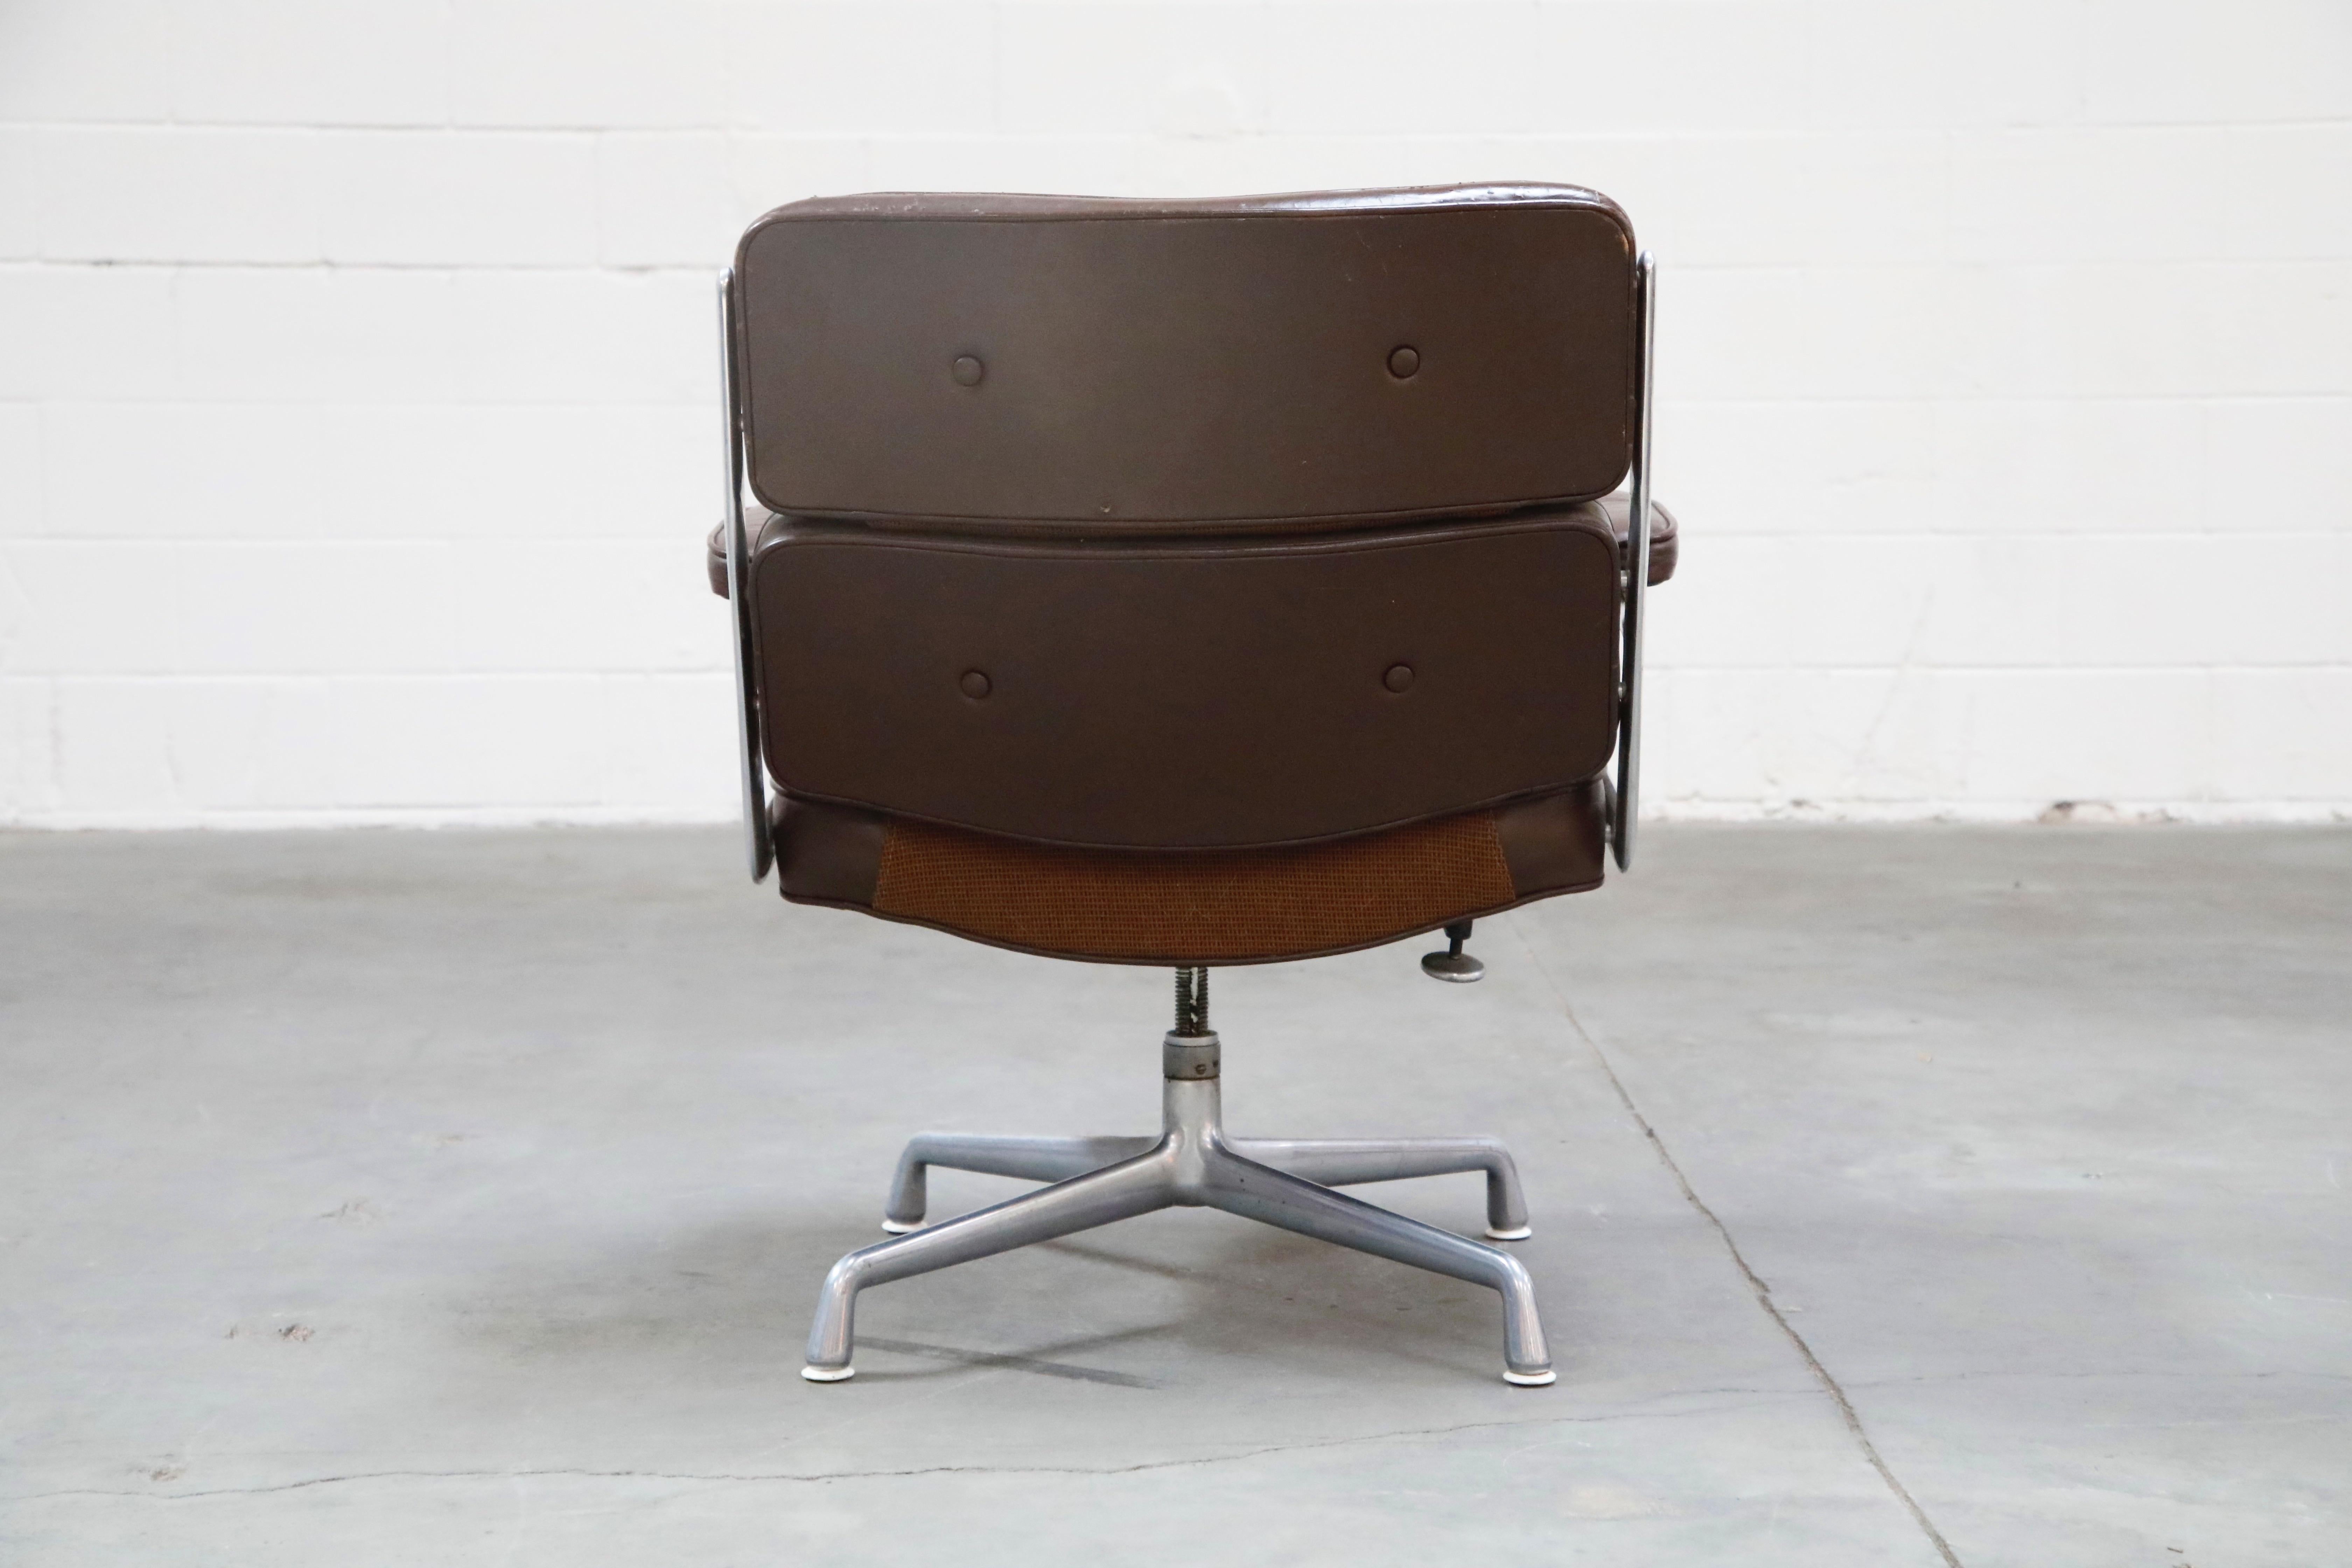 Late 20th Century Pair of Time Life 'Lobby' Chairs by Charles Eames for Herman Miller 1970s Signed